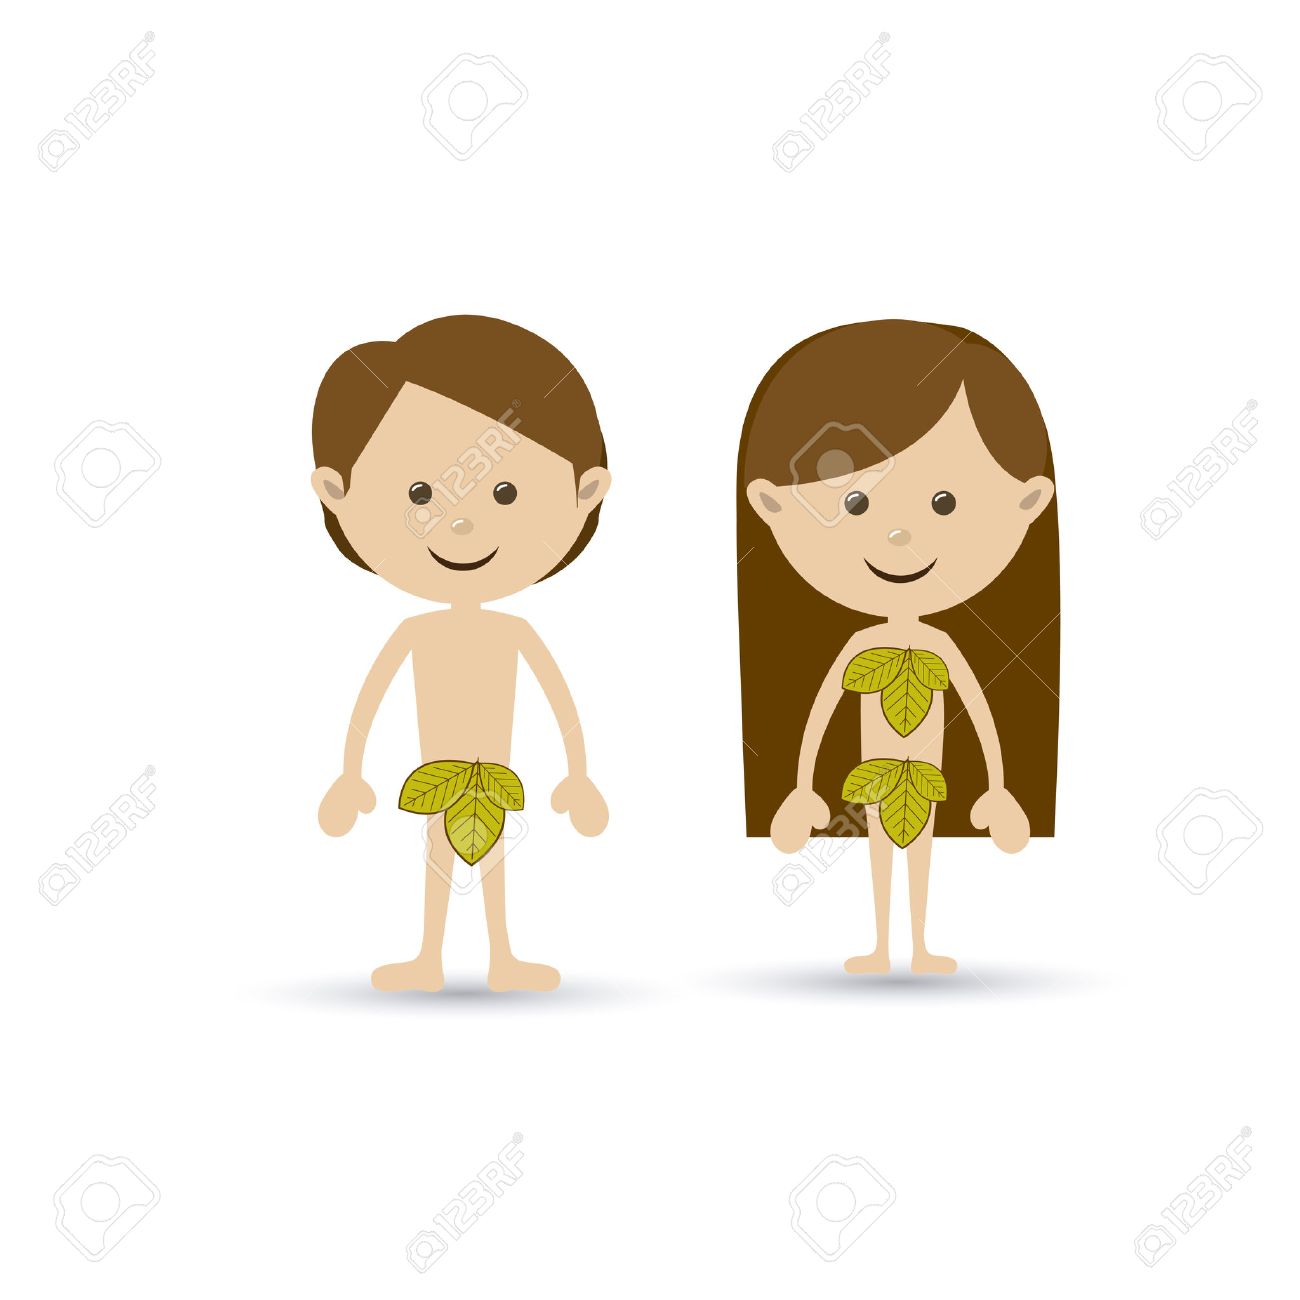 Adam And Eve Over White Background Vector Illustration Royalty